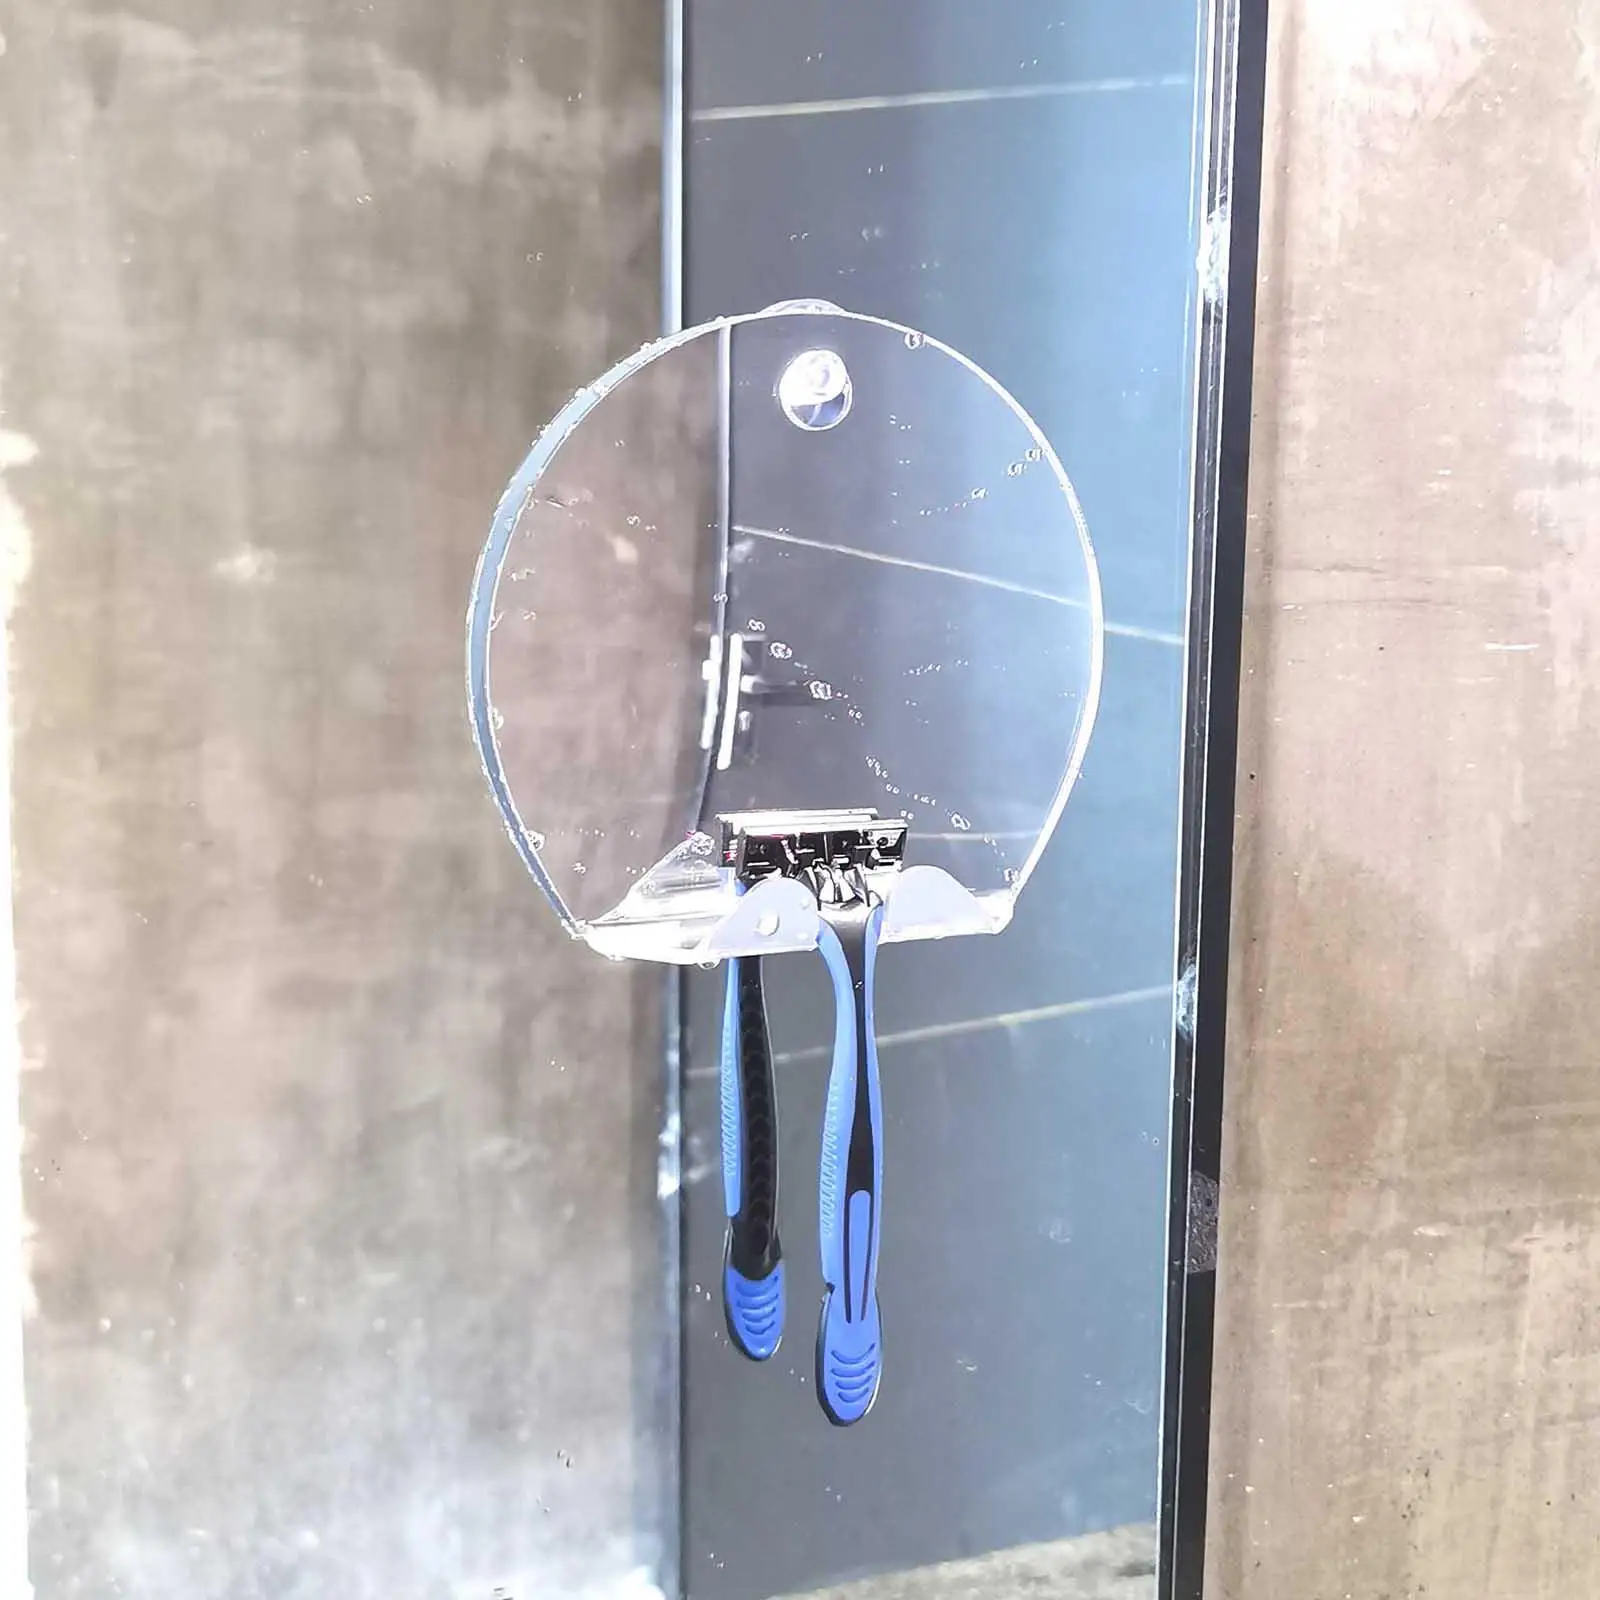  Shower Mirror, Includes 2 Suction Cup, -Fog Mirror, Frameless Makeup Shave Mirror, Wall Hanging Mirror